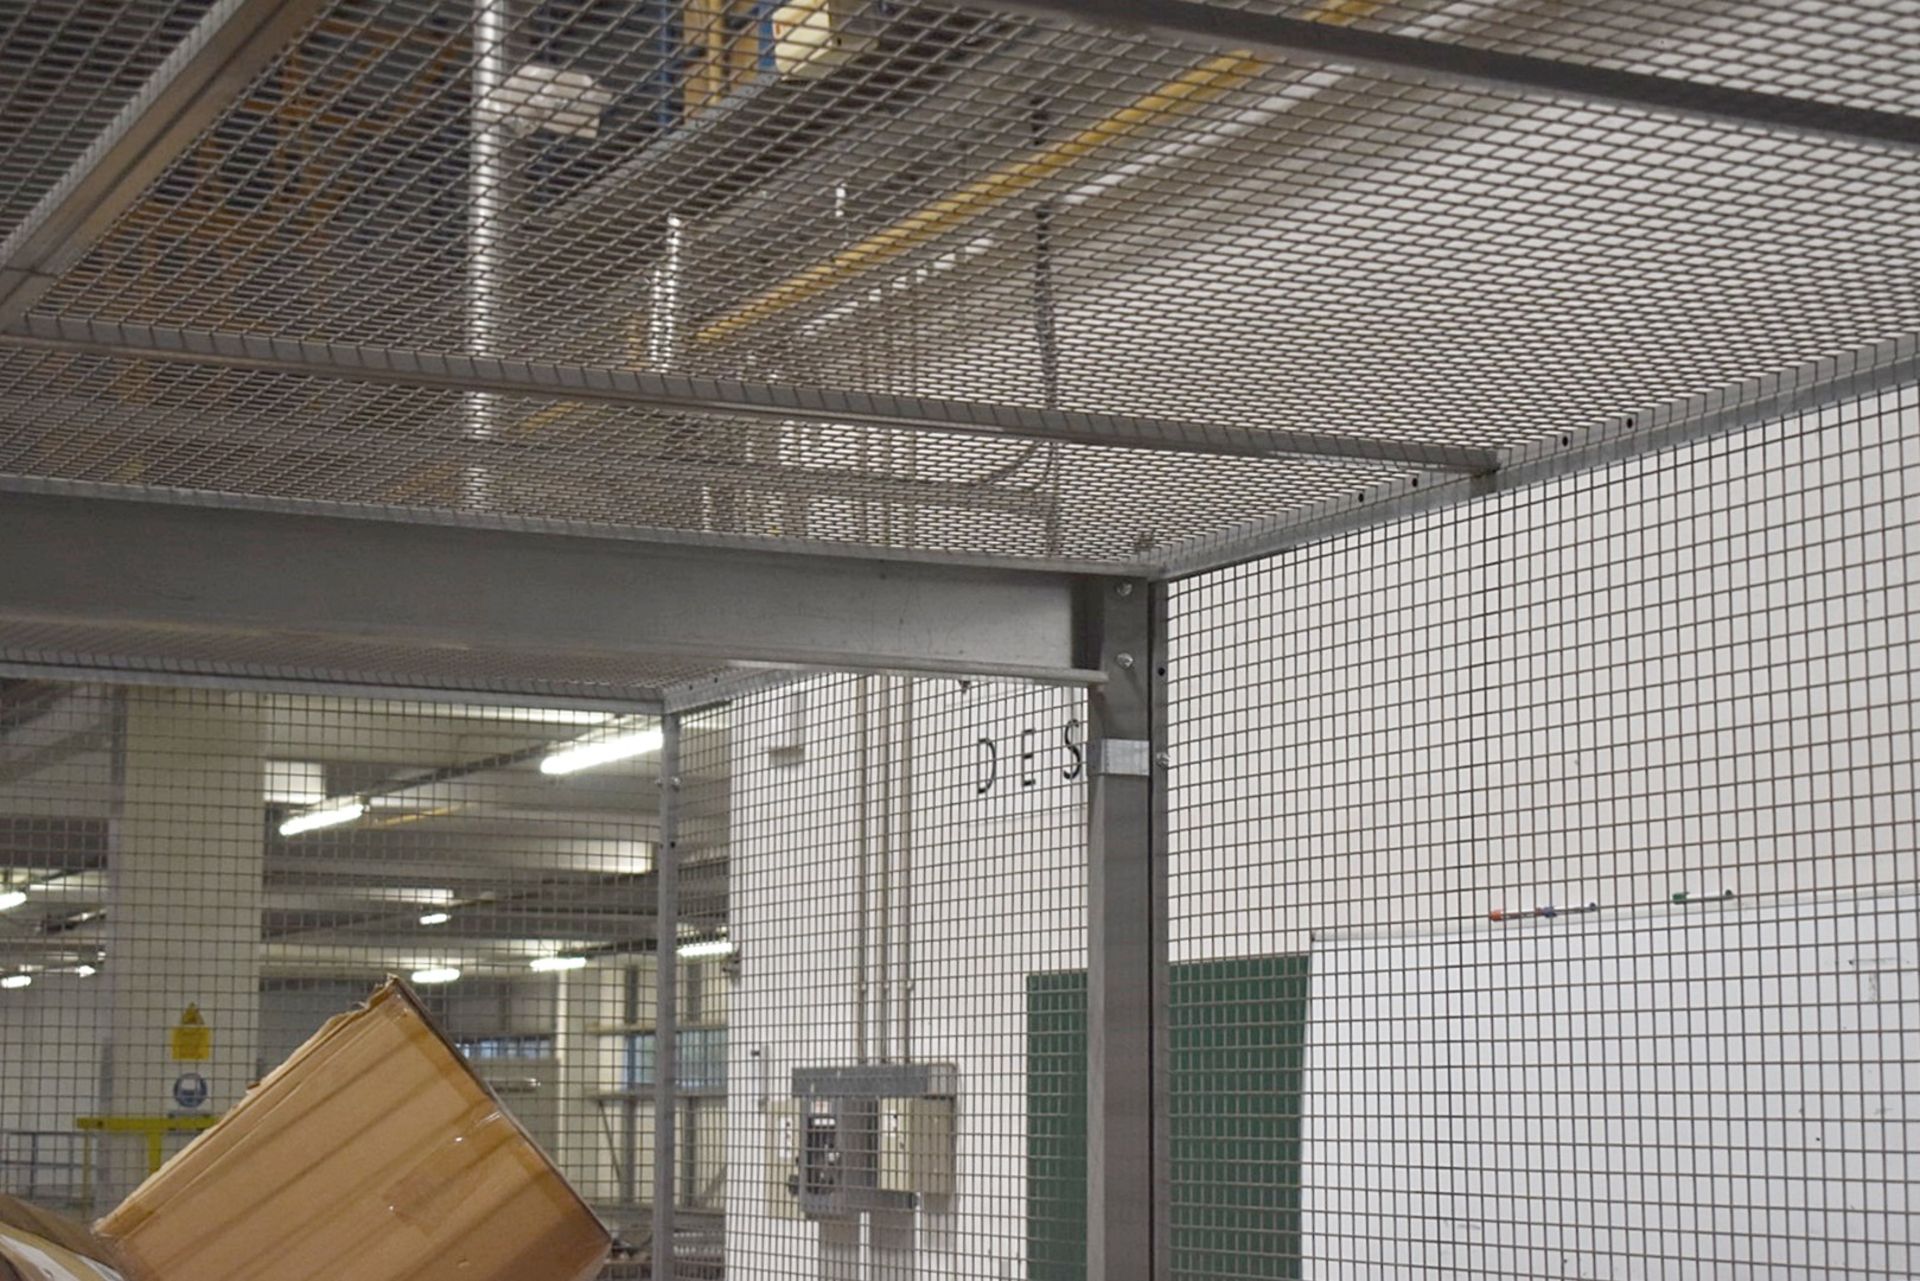 1 x Security Cage Enclosure For Warehouses - Ideal For Storing High Value Stock or Hazardous Goods - - Image 8 of 12